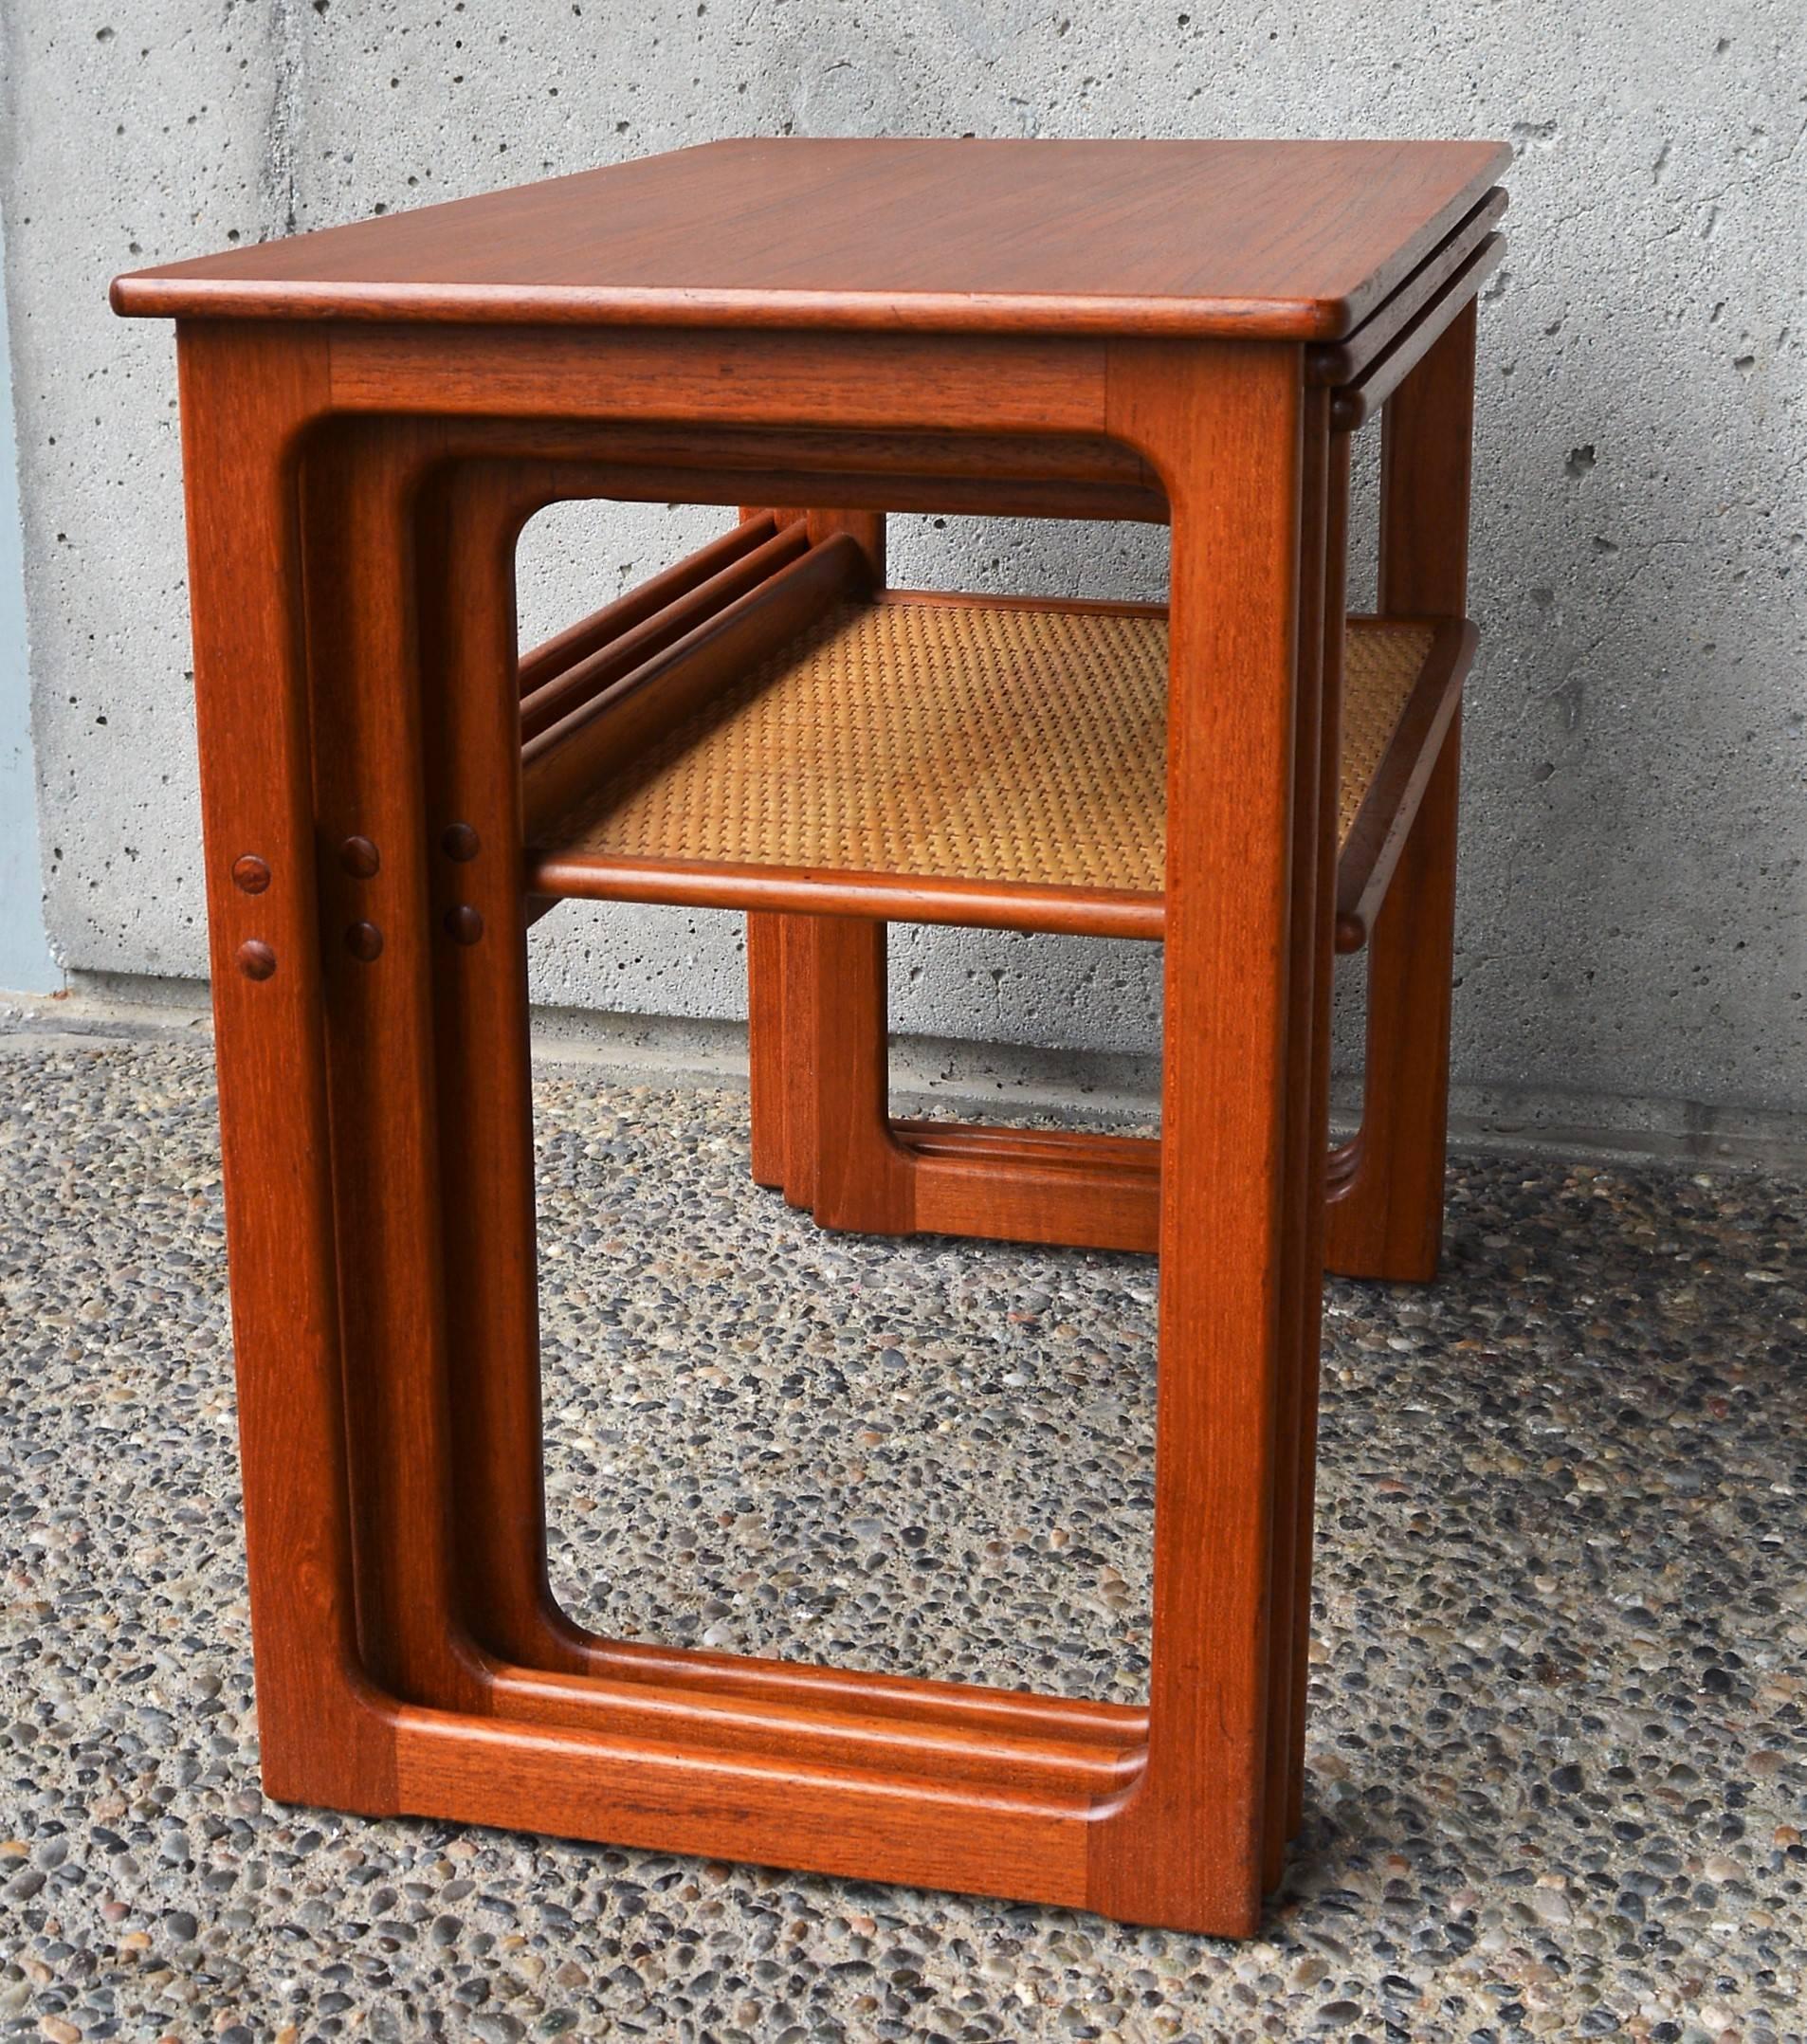 Mid-20th Century Danish Modern Set of Three Larger Teak Nesting Tables with a Woven Cane Shelf